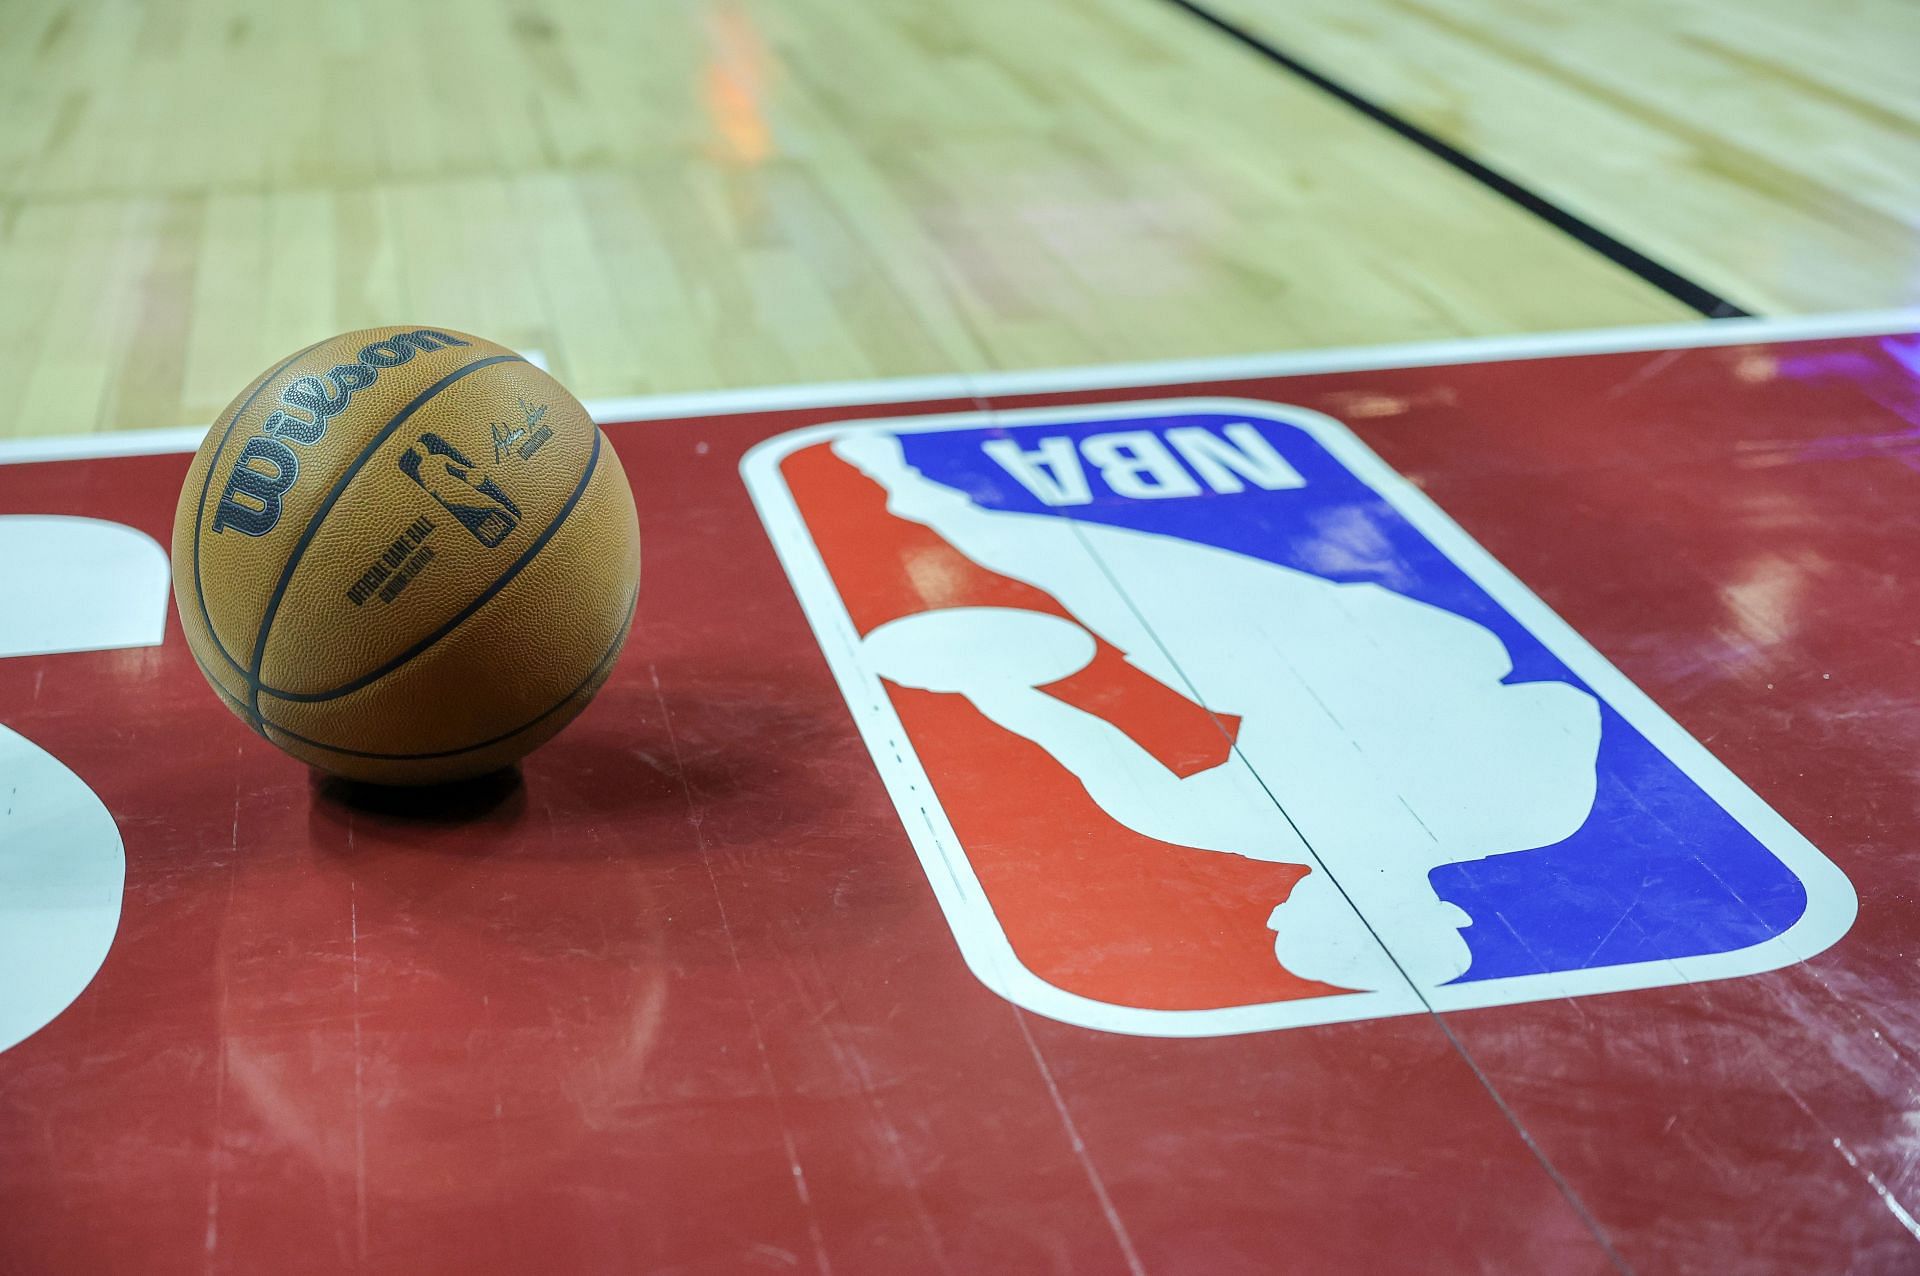 NBA live streams: How to watch 2023-24 games for free on NBA League Pass